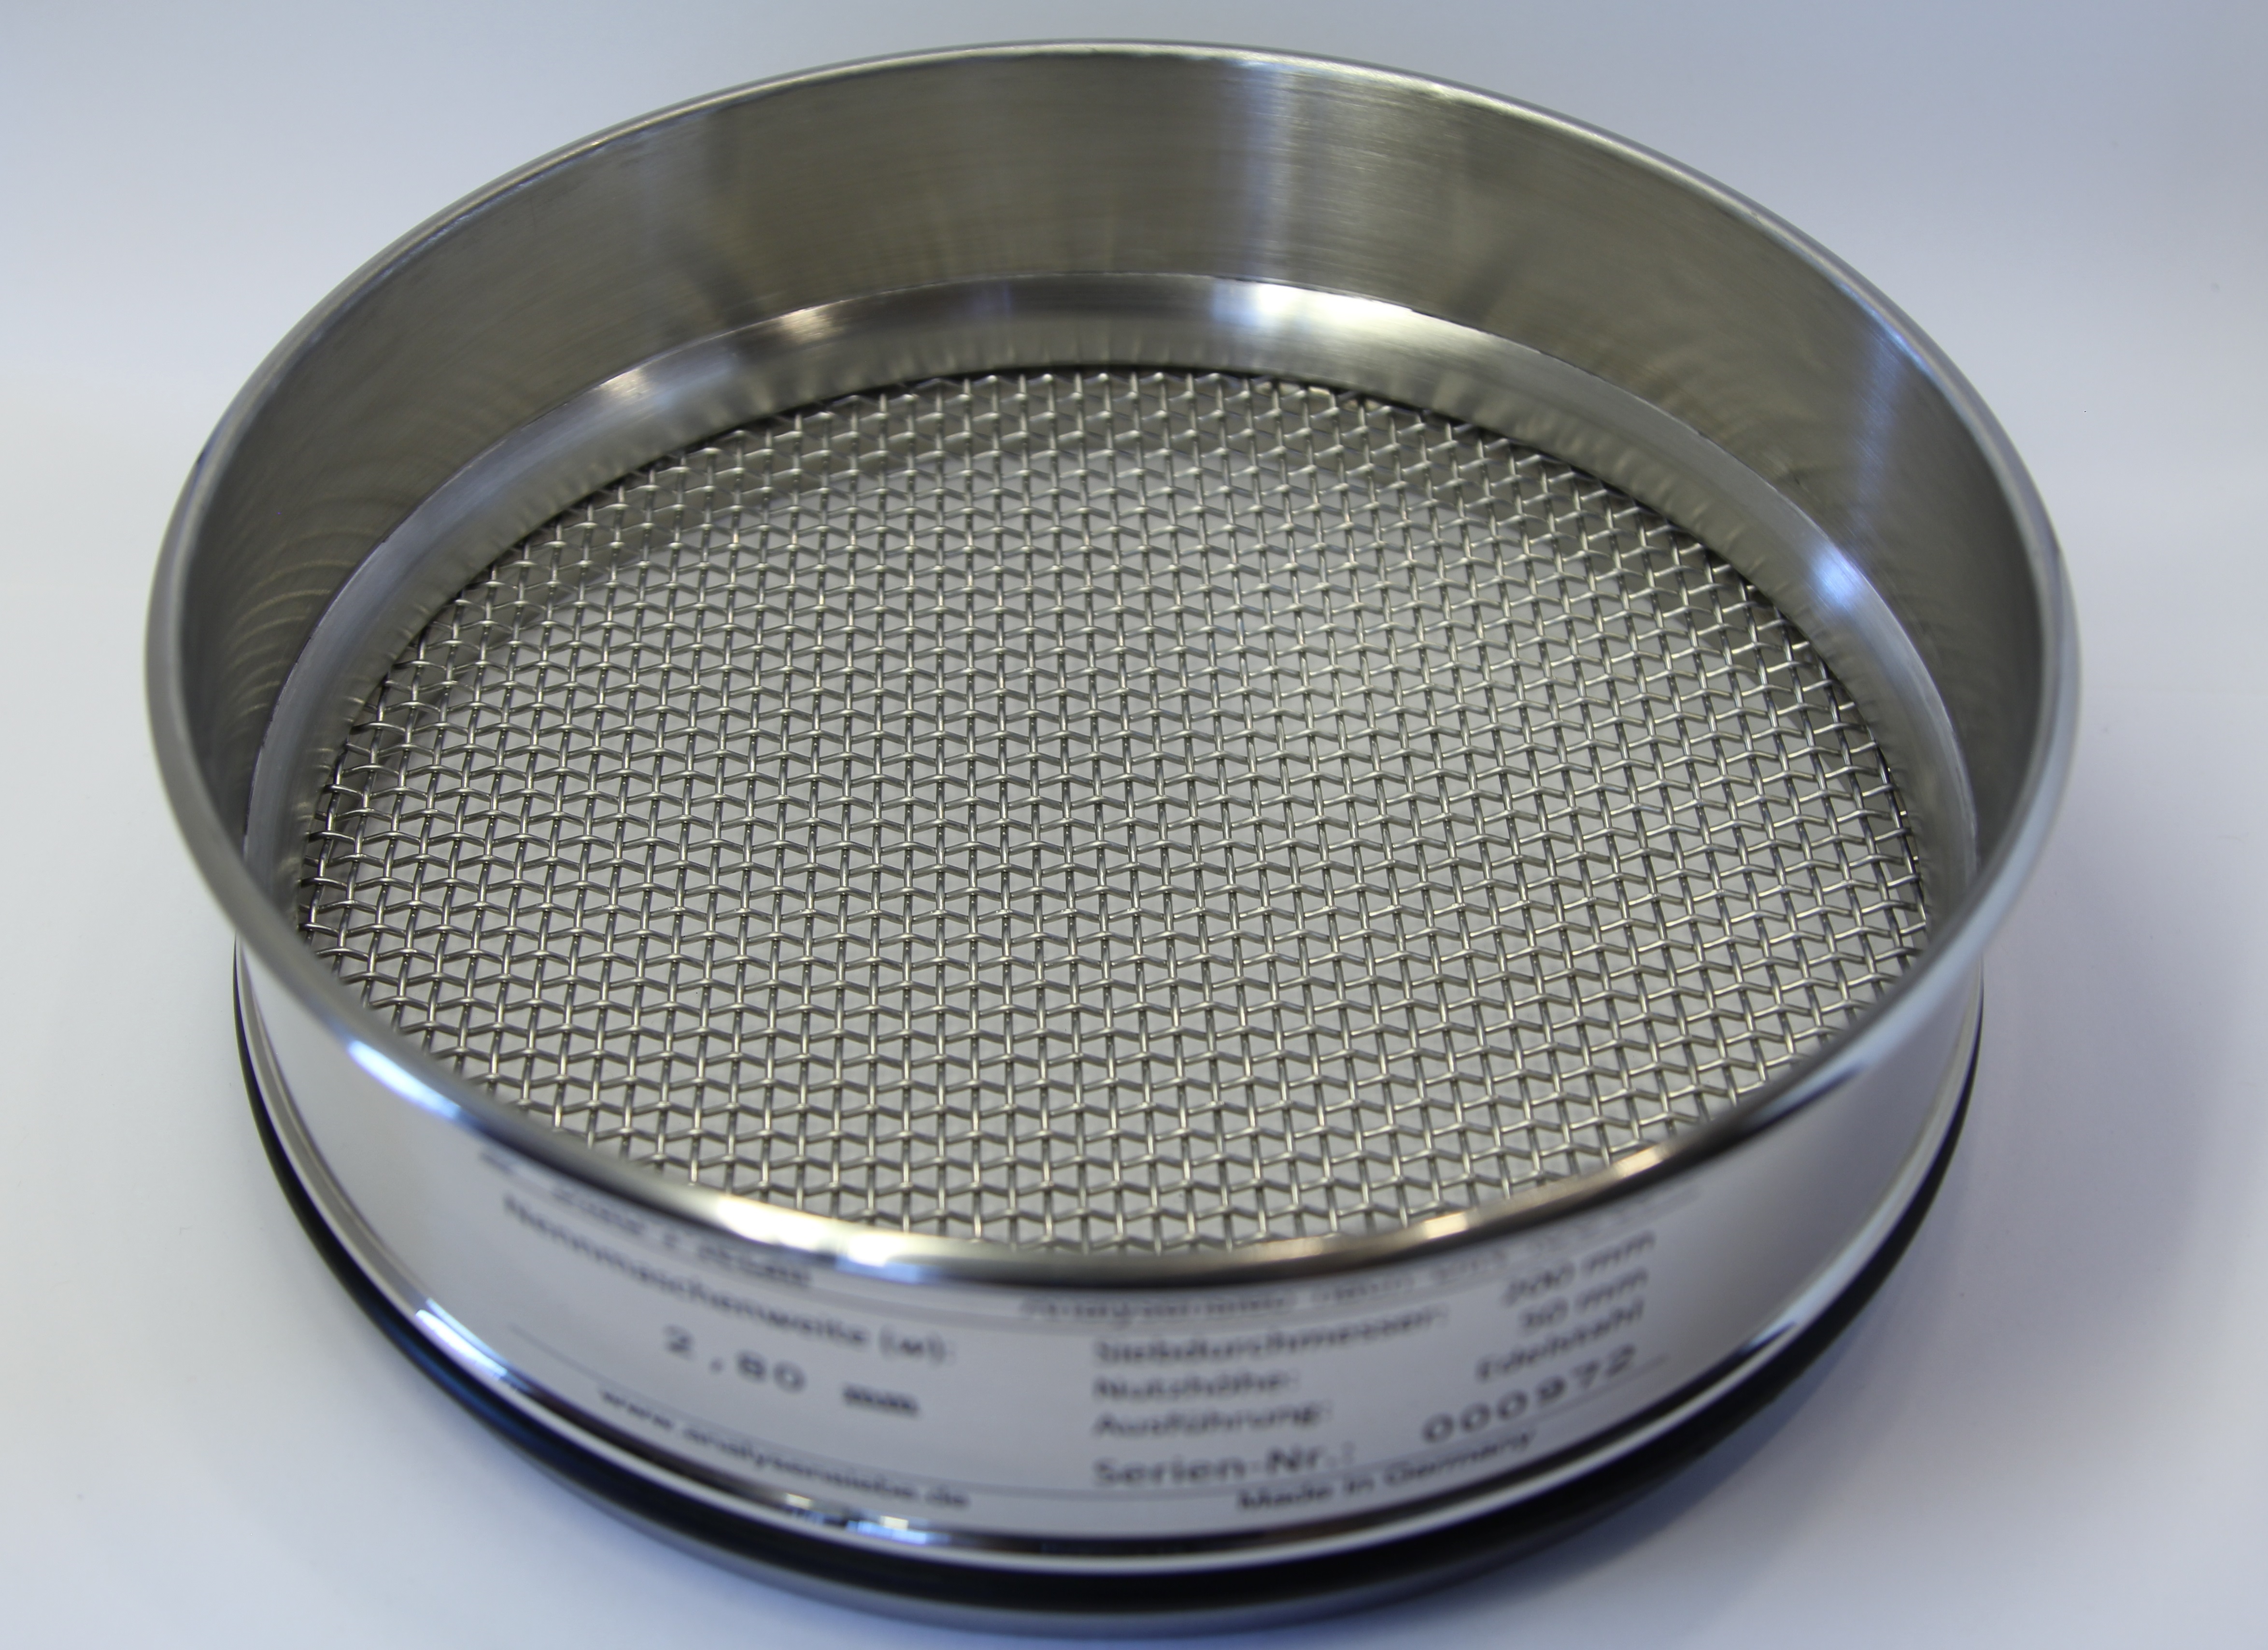 Sieves Laboratory Test Sieves according to ASTM E11